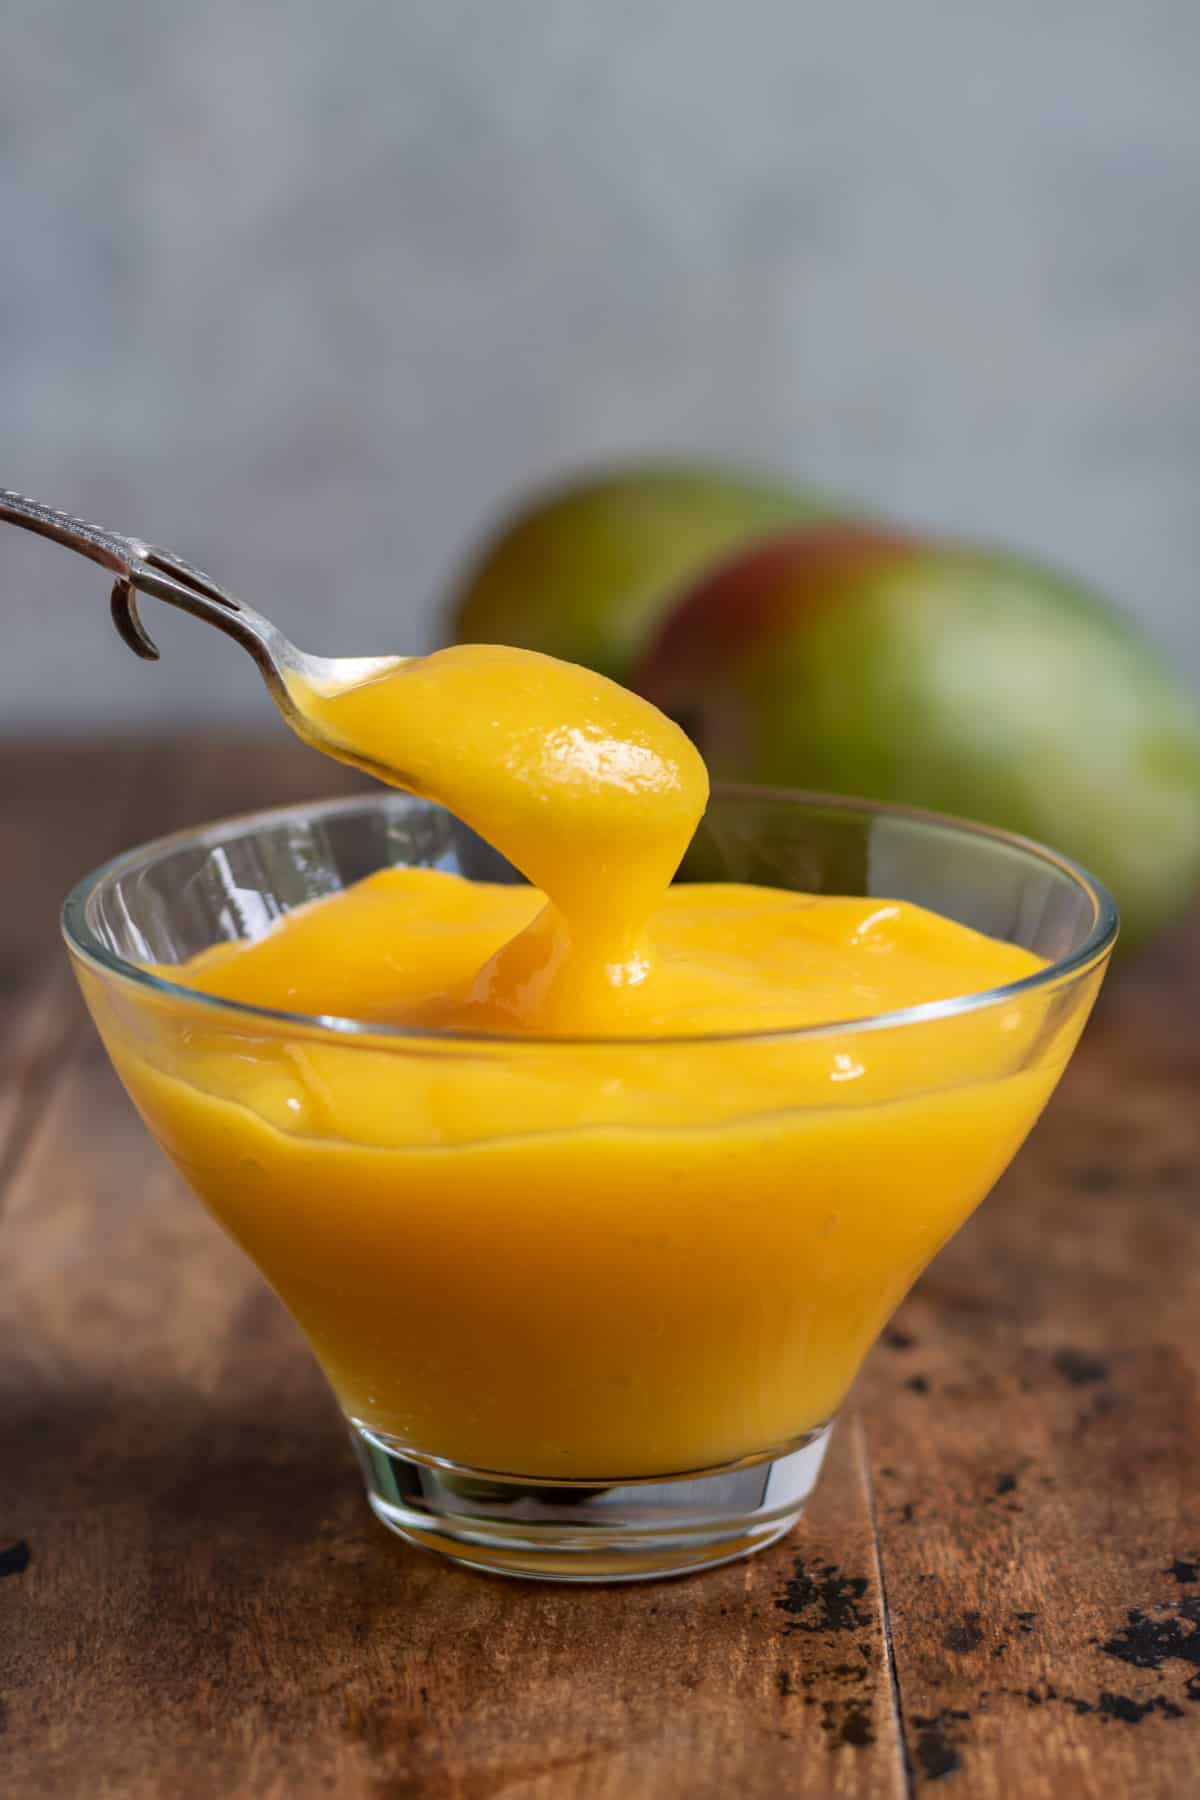 Spoon in a dish of mango pulp on a wooden table.